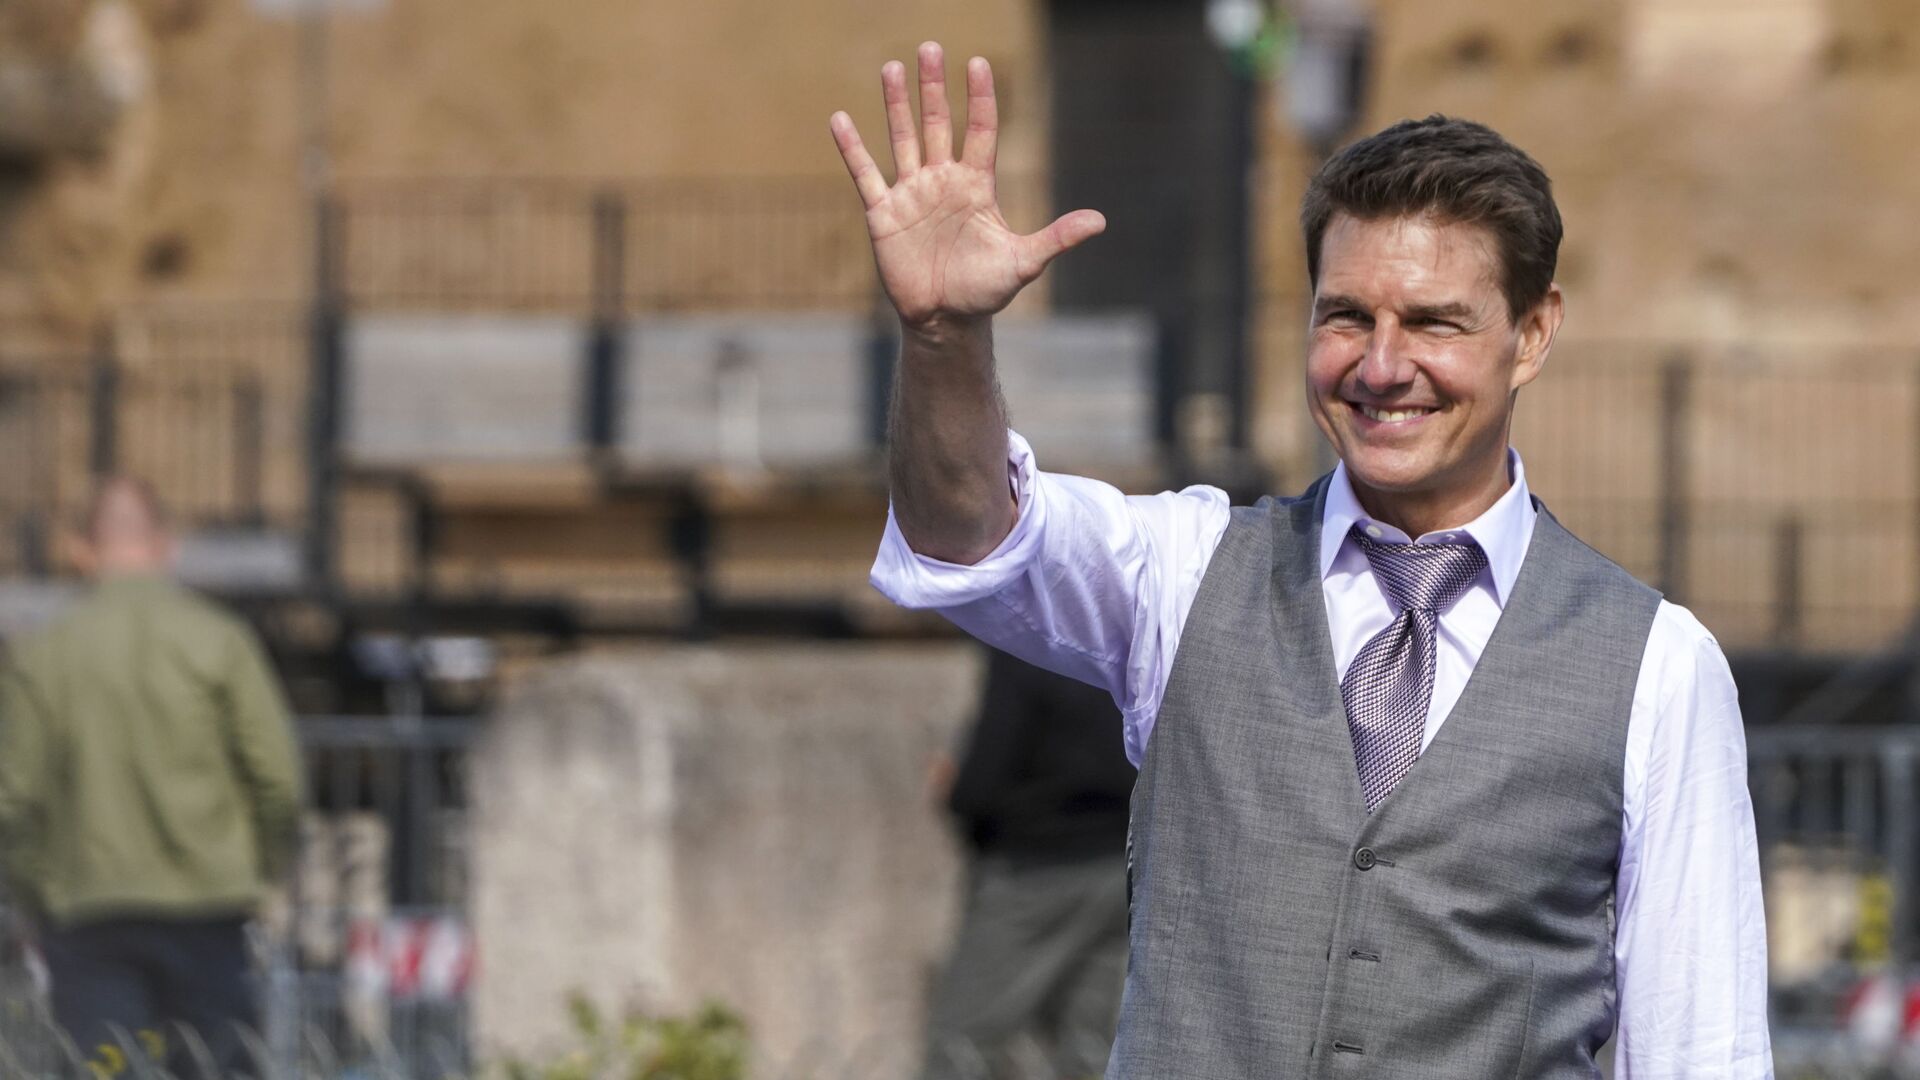 Actor Tom Cruise waves to fans during a break in the shooting of the film Mission Impossible 7, in Rome, Monday, Oct. 12, 2020. - Sputnik International, 1920, 12.05.2021